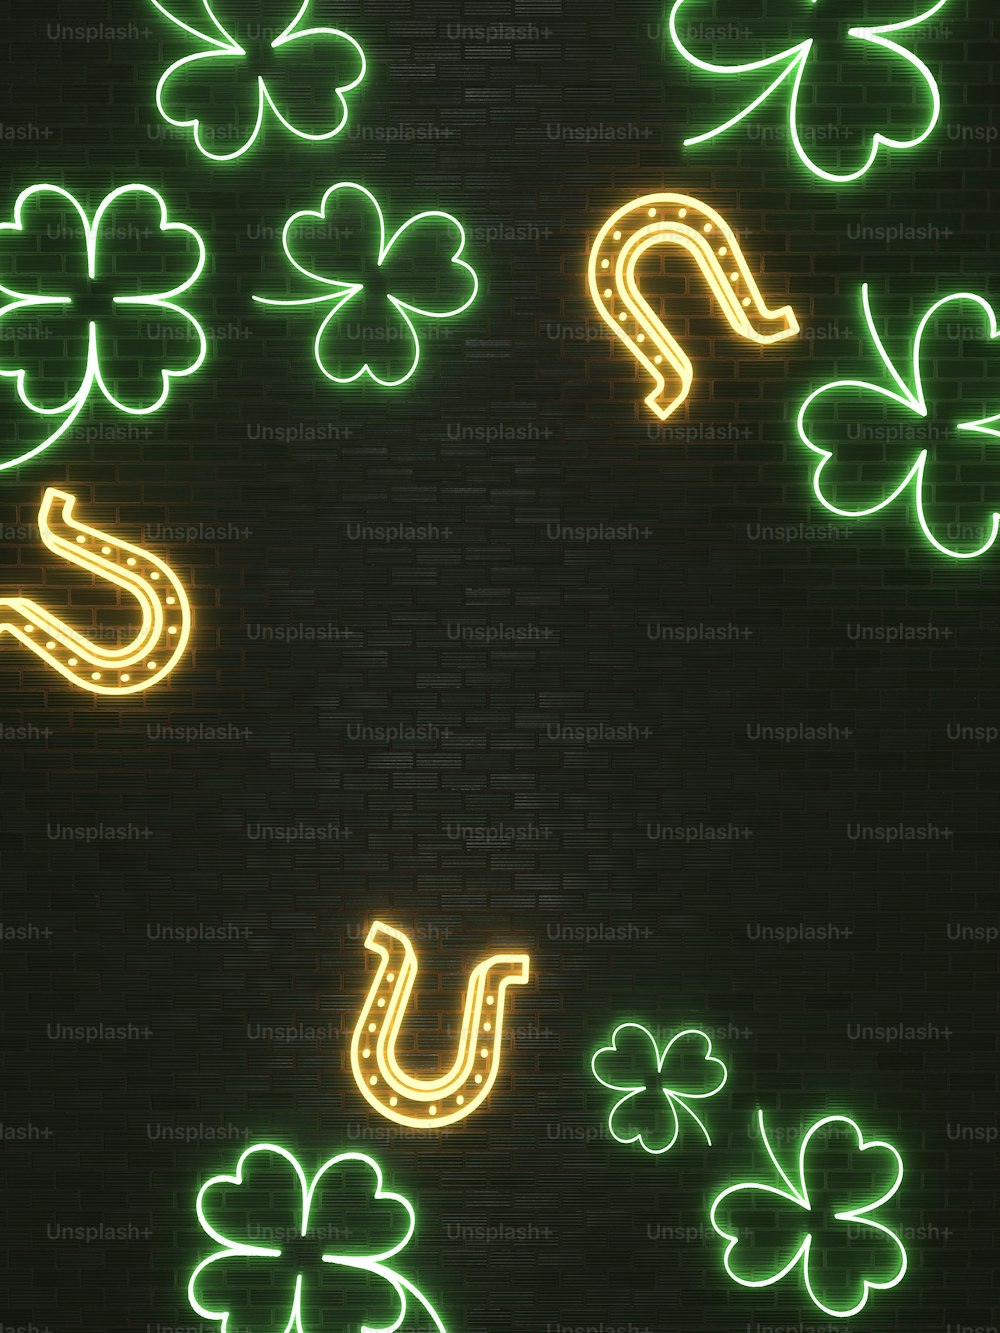 a green and yellow neon sign on a brick wall